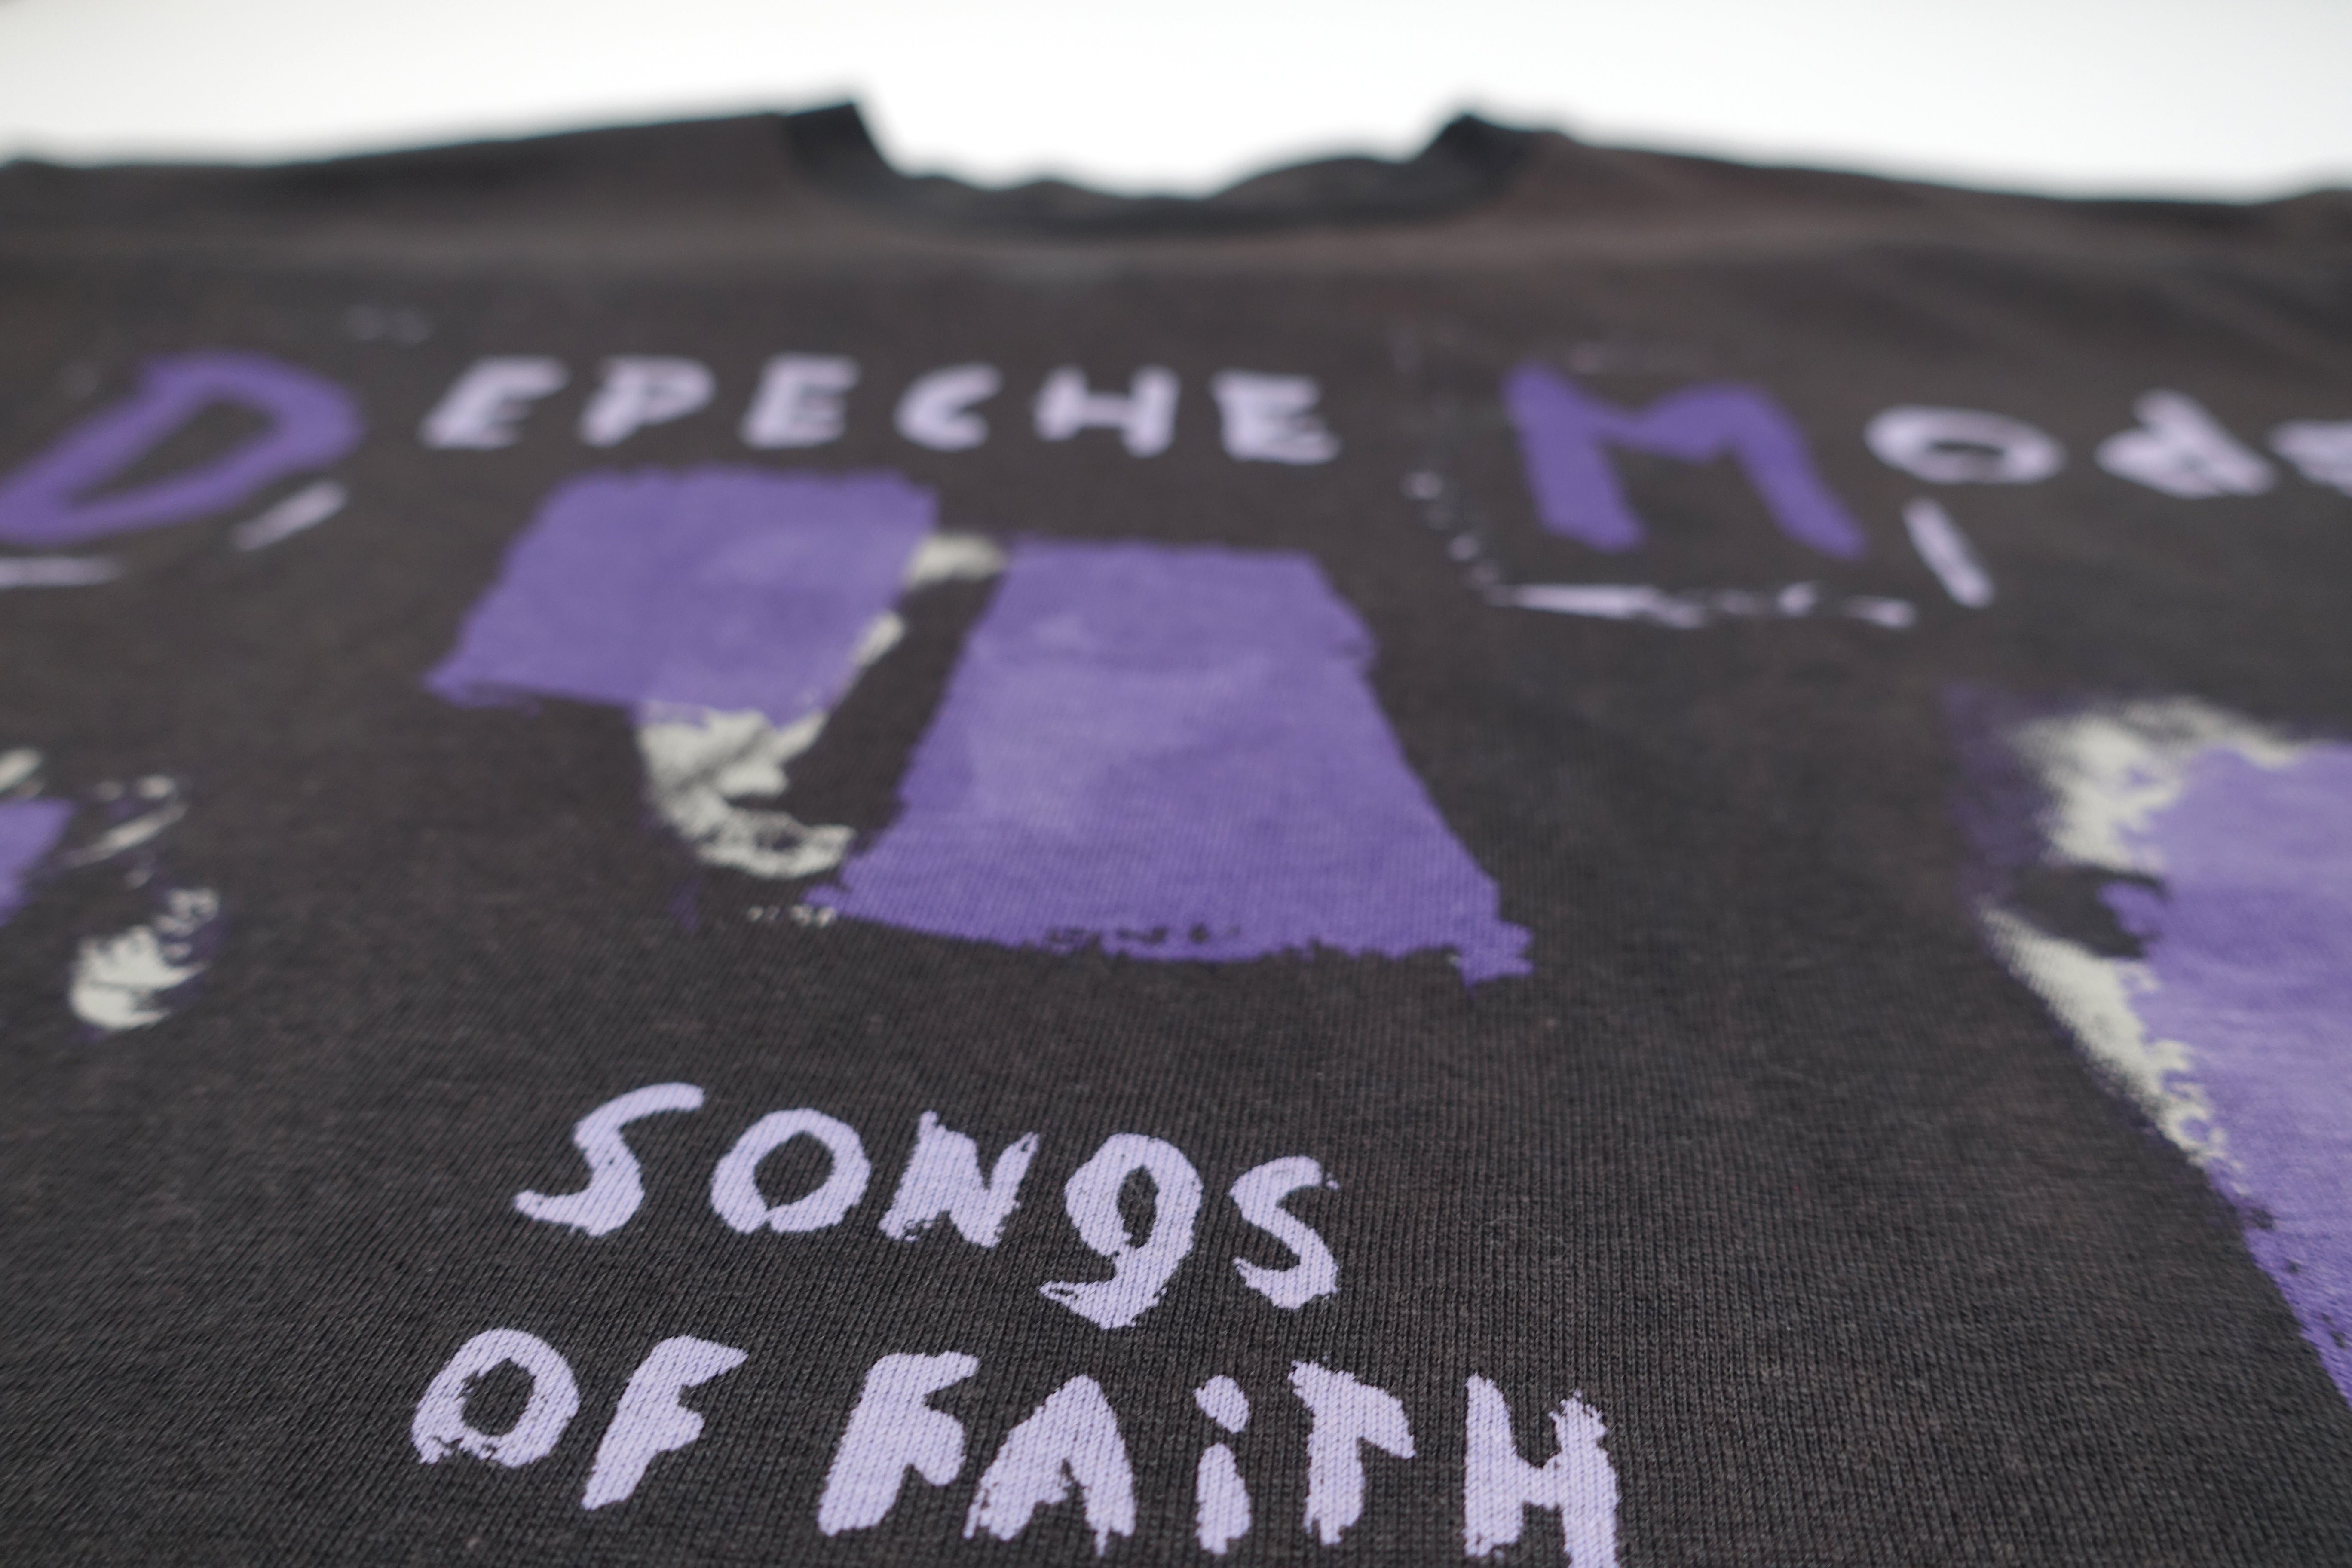 Depeche Mode – Songs Of Faith And Devotion 1993 Tour Shirt Size Large